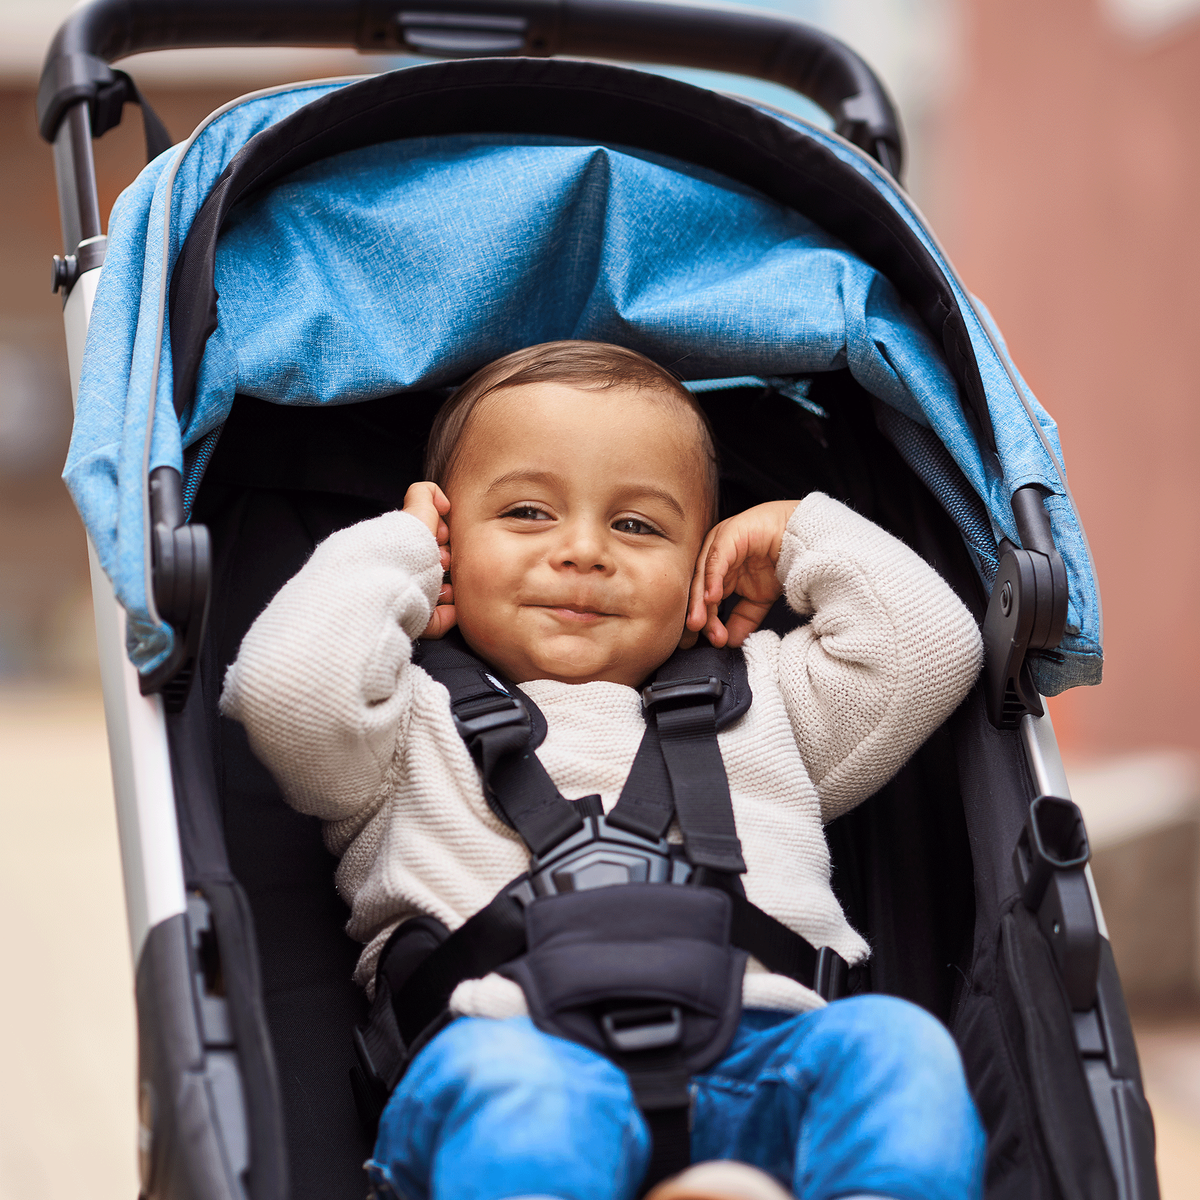 A close-up of a toddler smiling in a blue Thule Spring compact stroller.